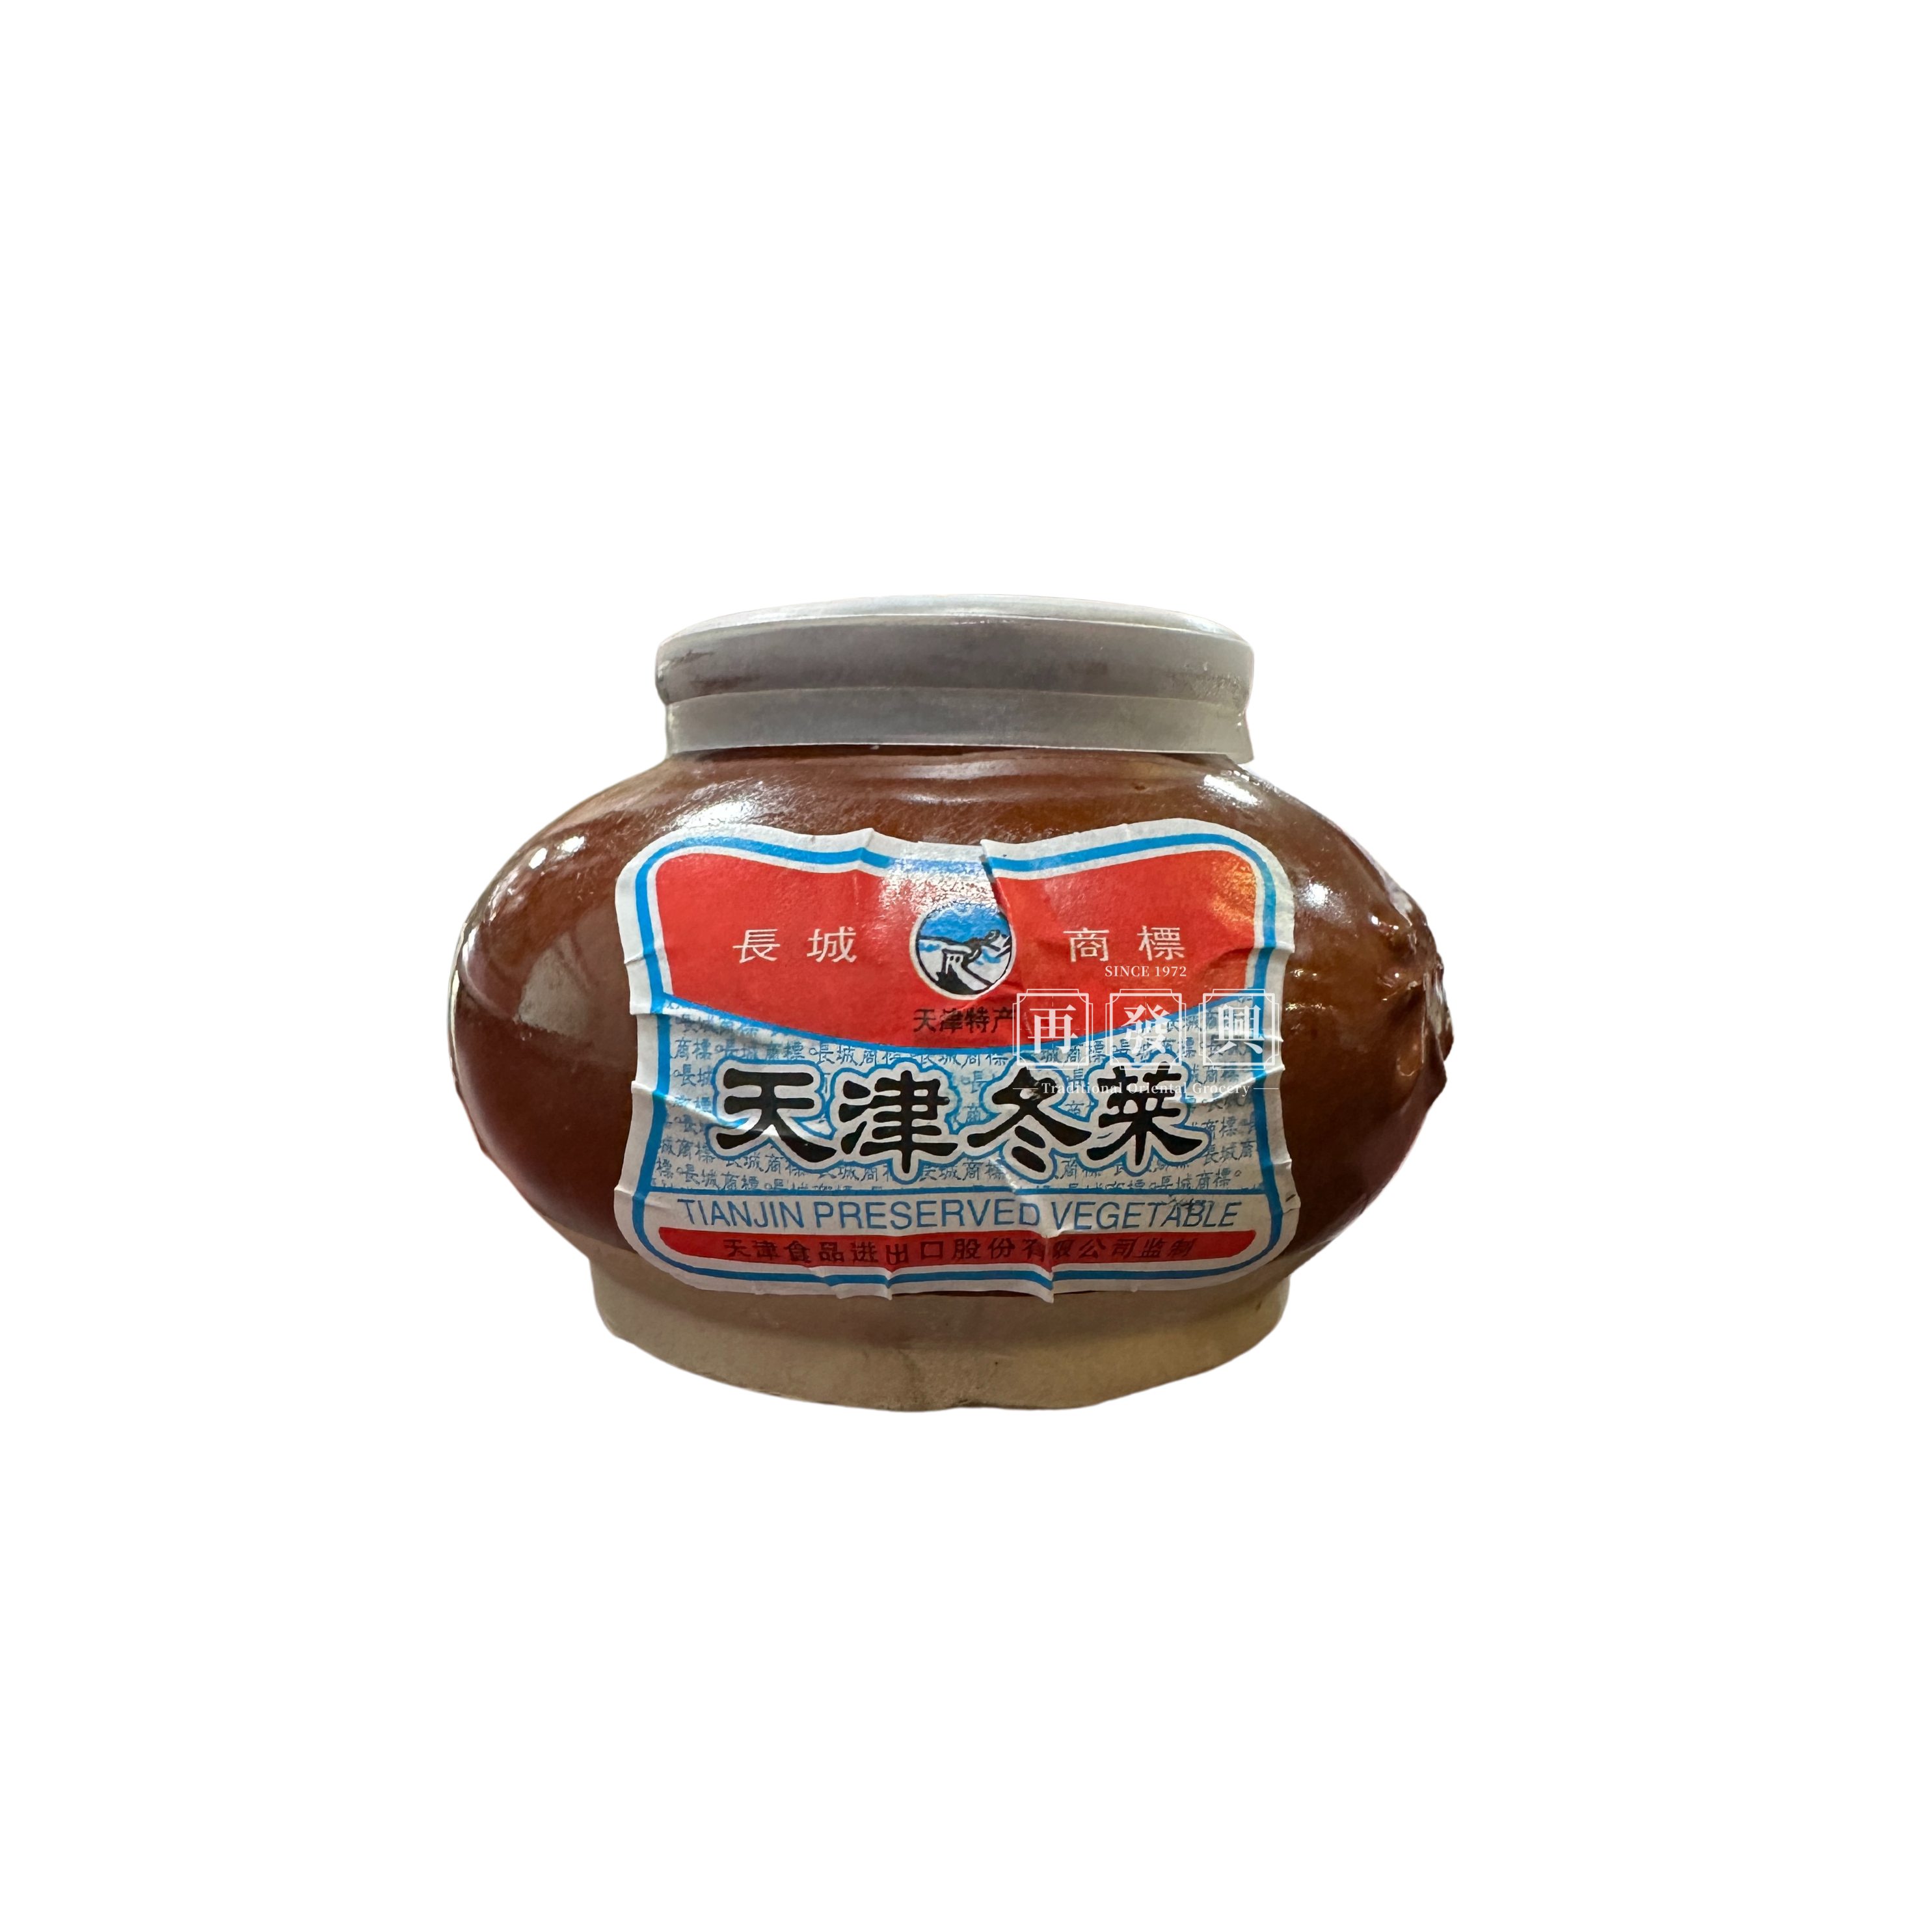 Cheng Chen Tian Jin Dried Salted Vegetable 天津冬菜 300g